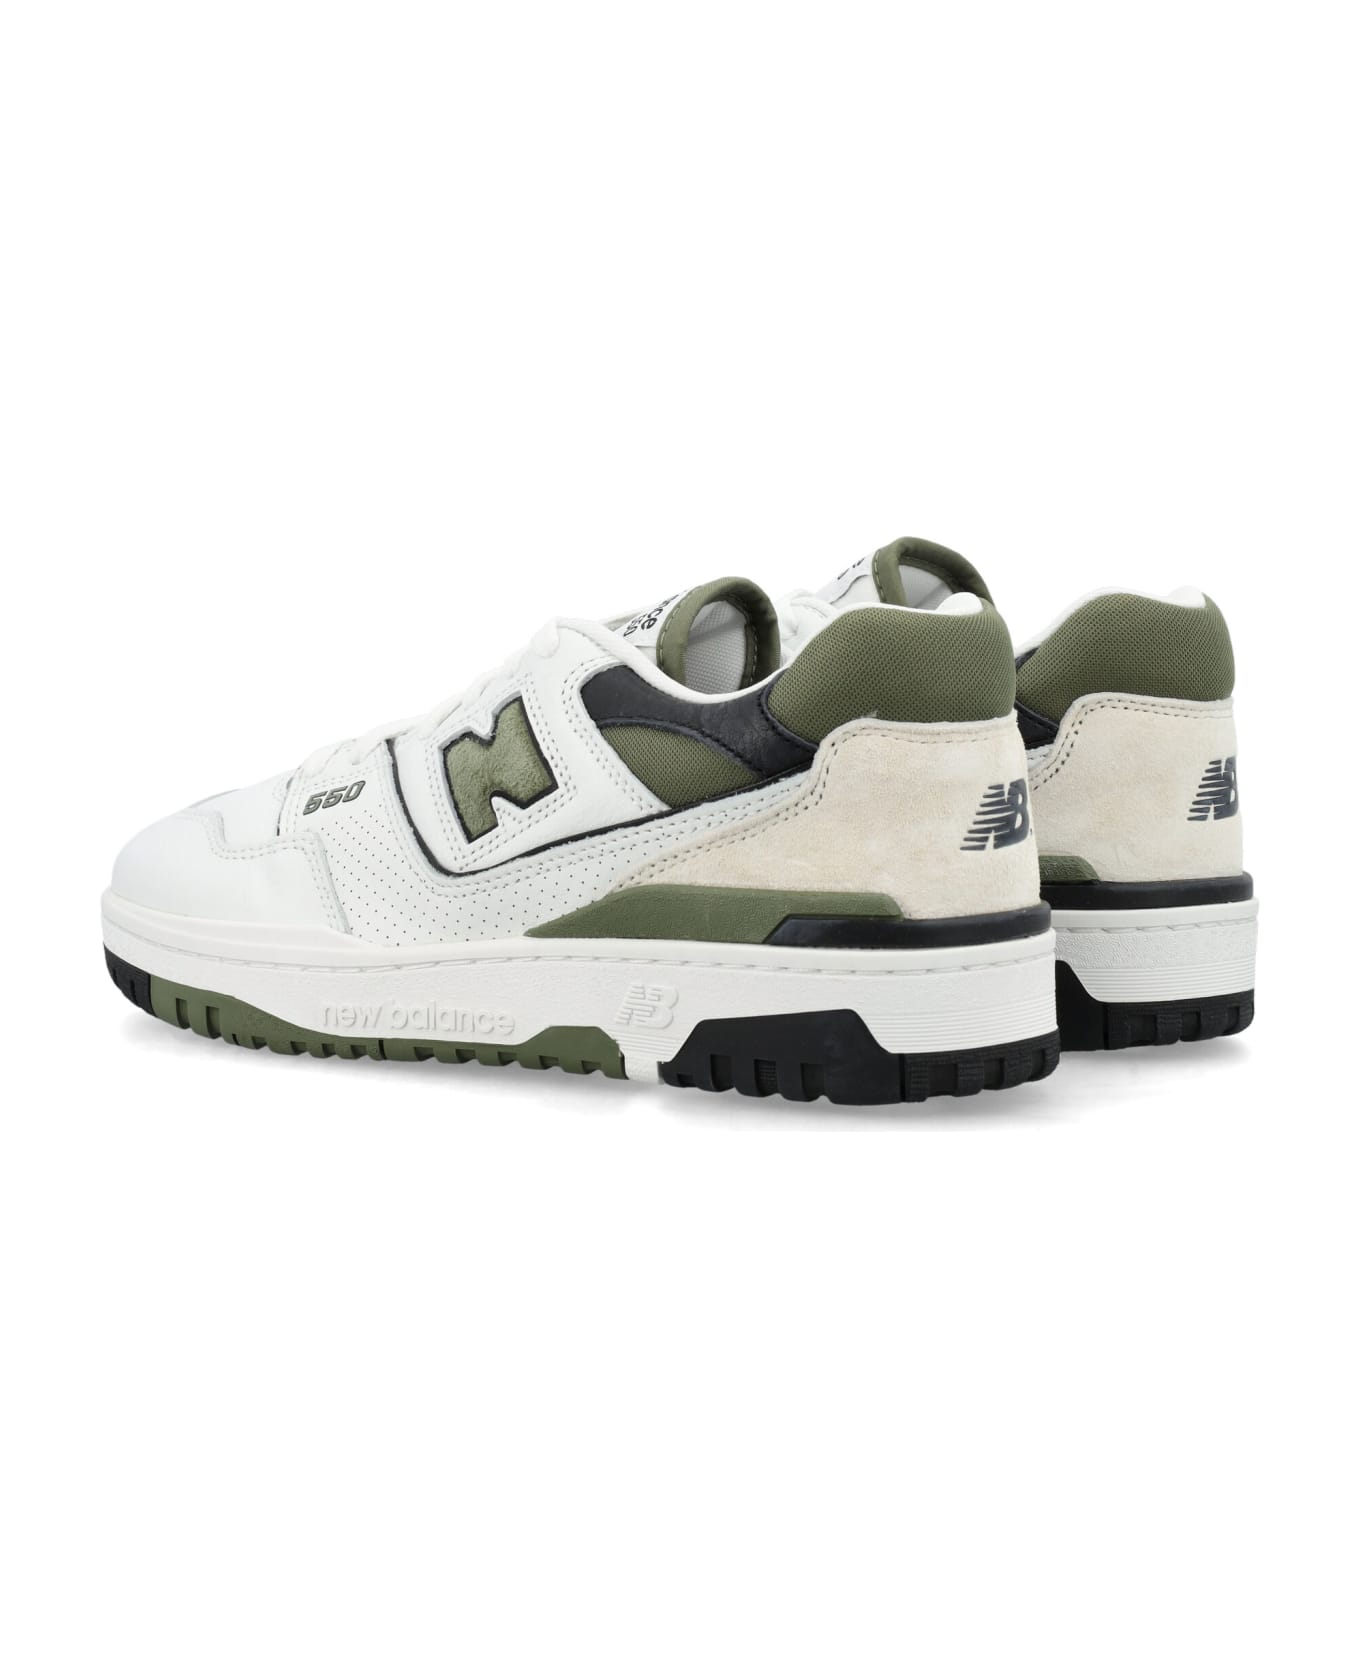 New Balance 550 Sneakers - WHITE OLIVE スニーカー